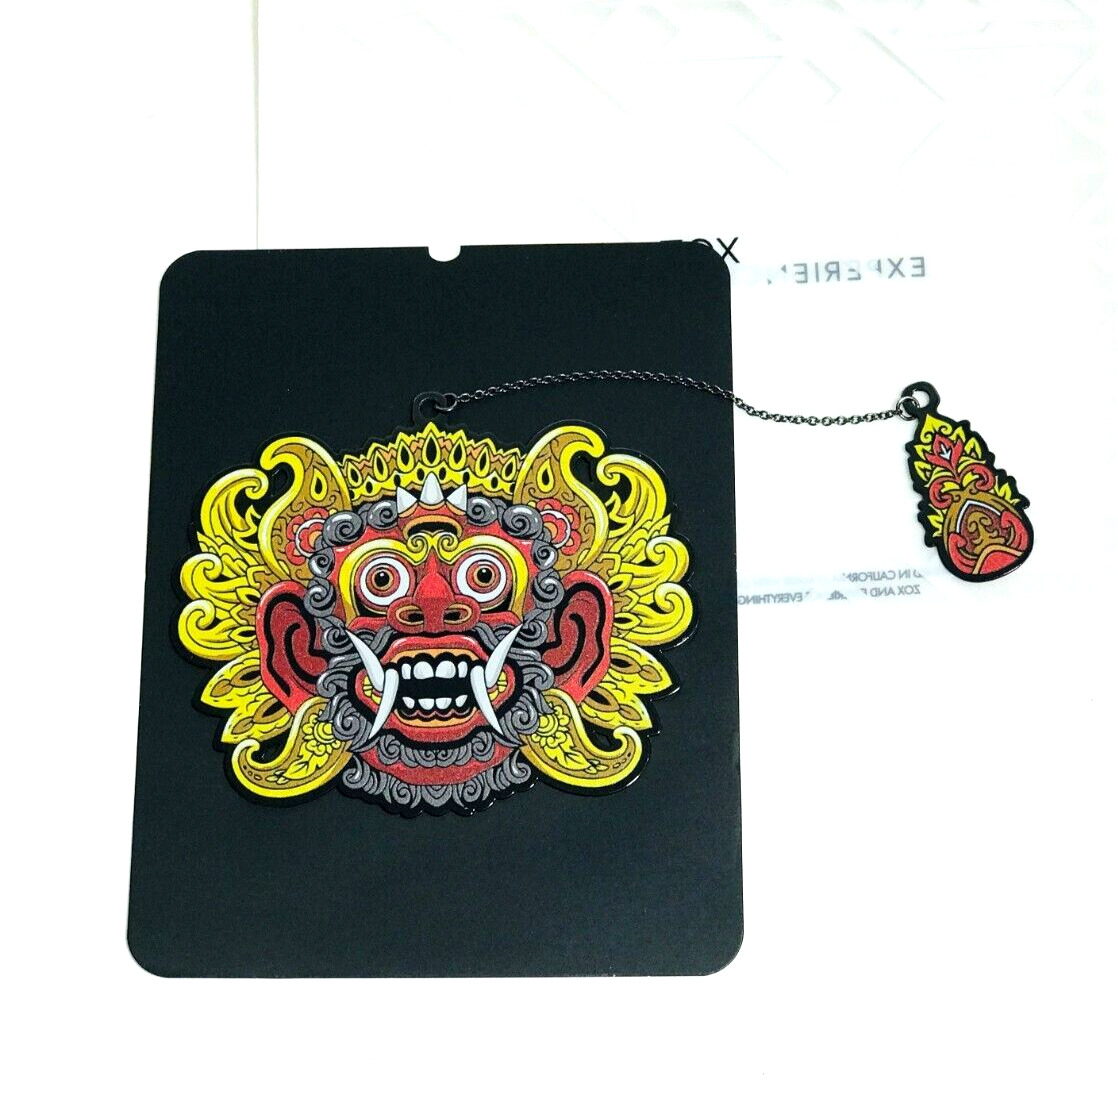 ZOX **CHOOSE YOUR SIDE, BARONG MASK** Delicate metal Bookmark New in PACKAGE